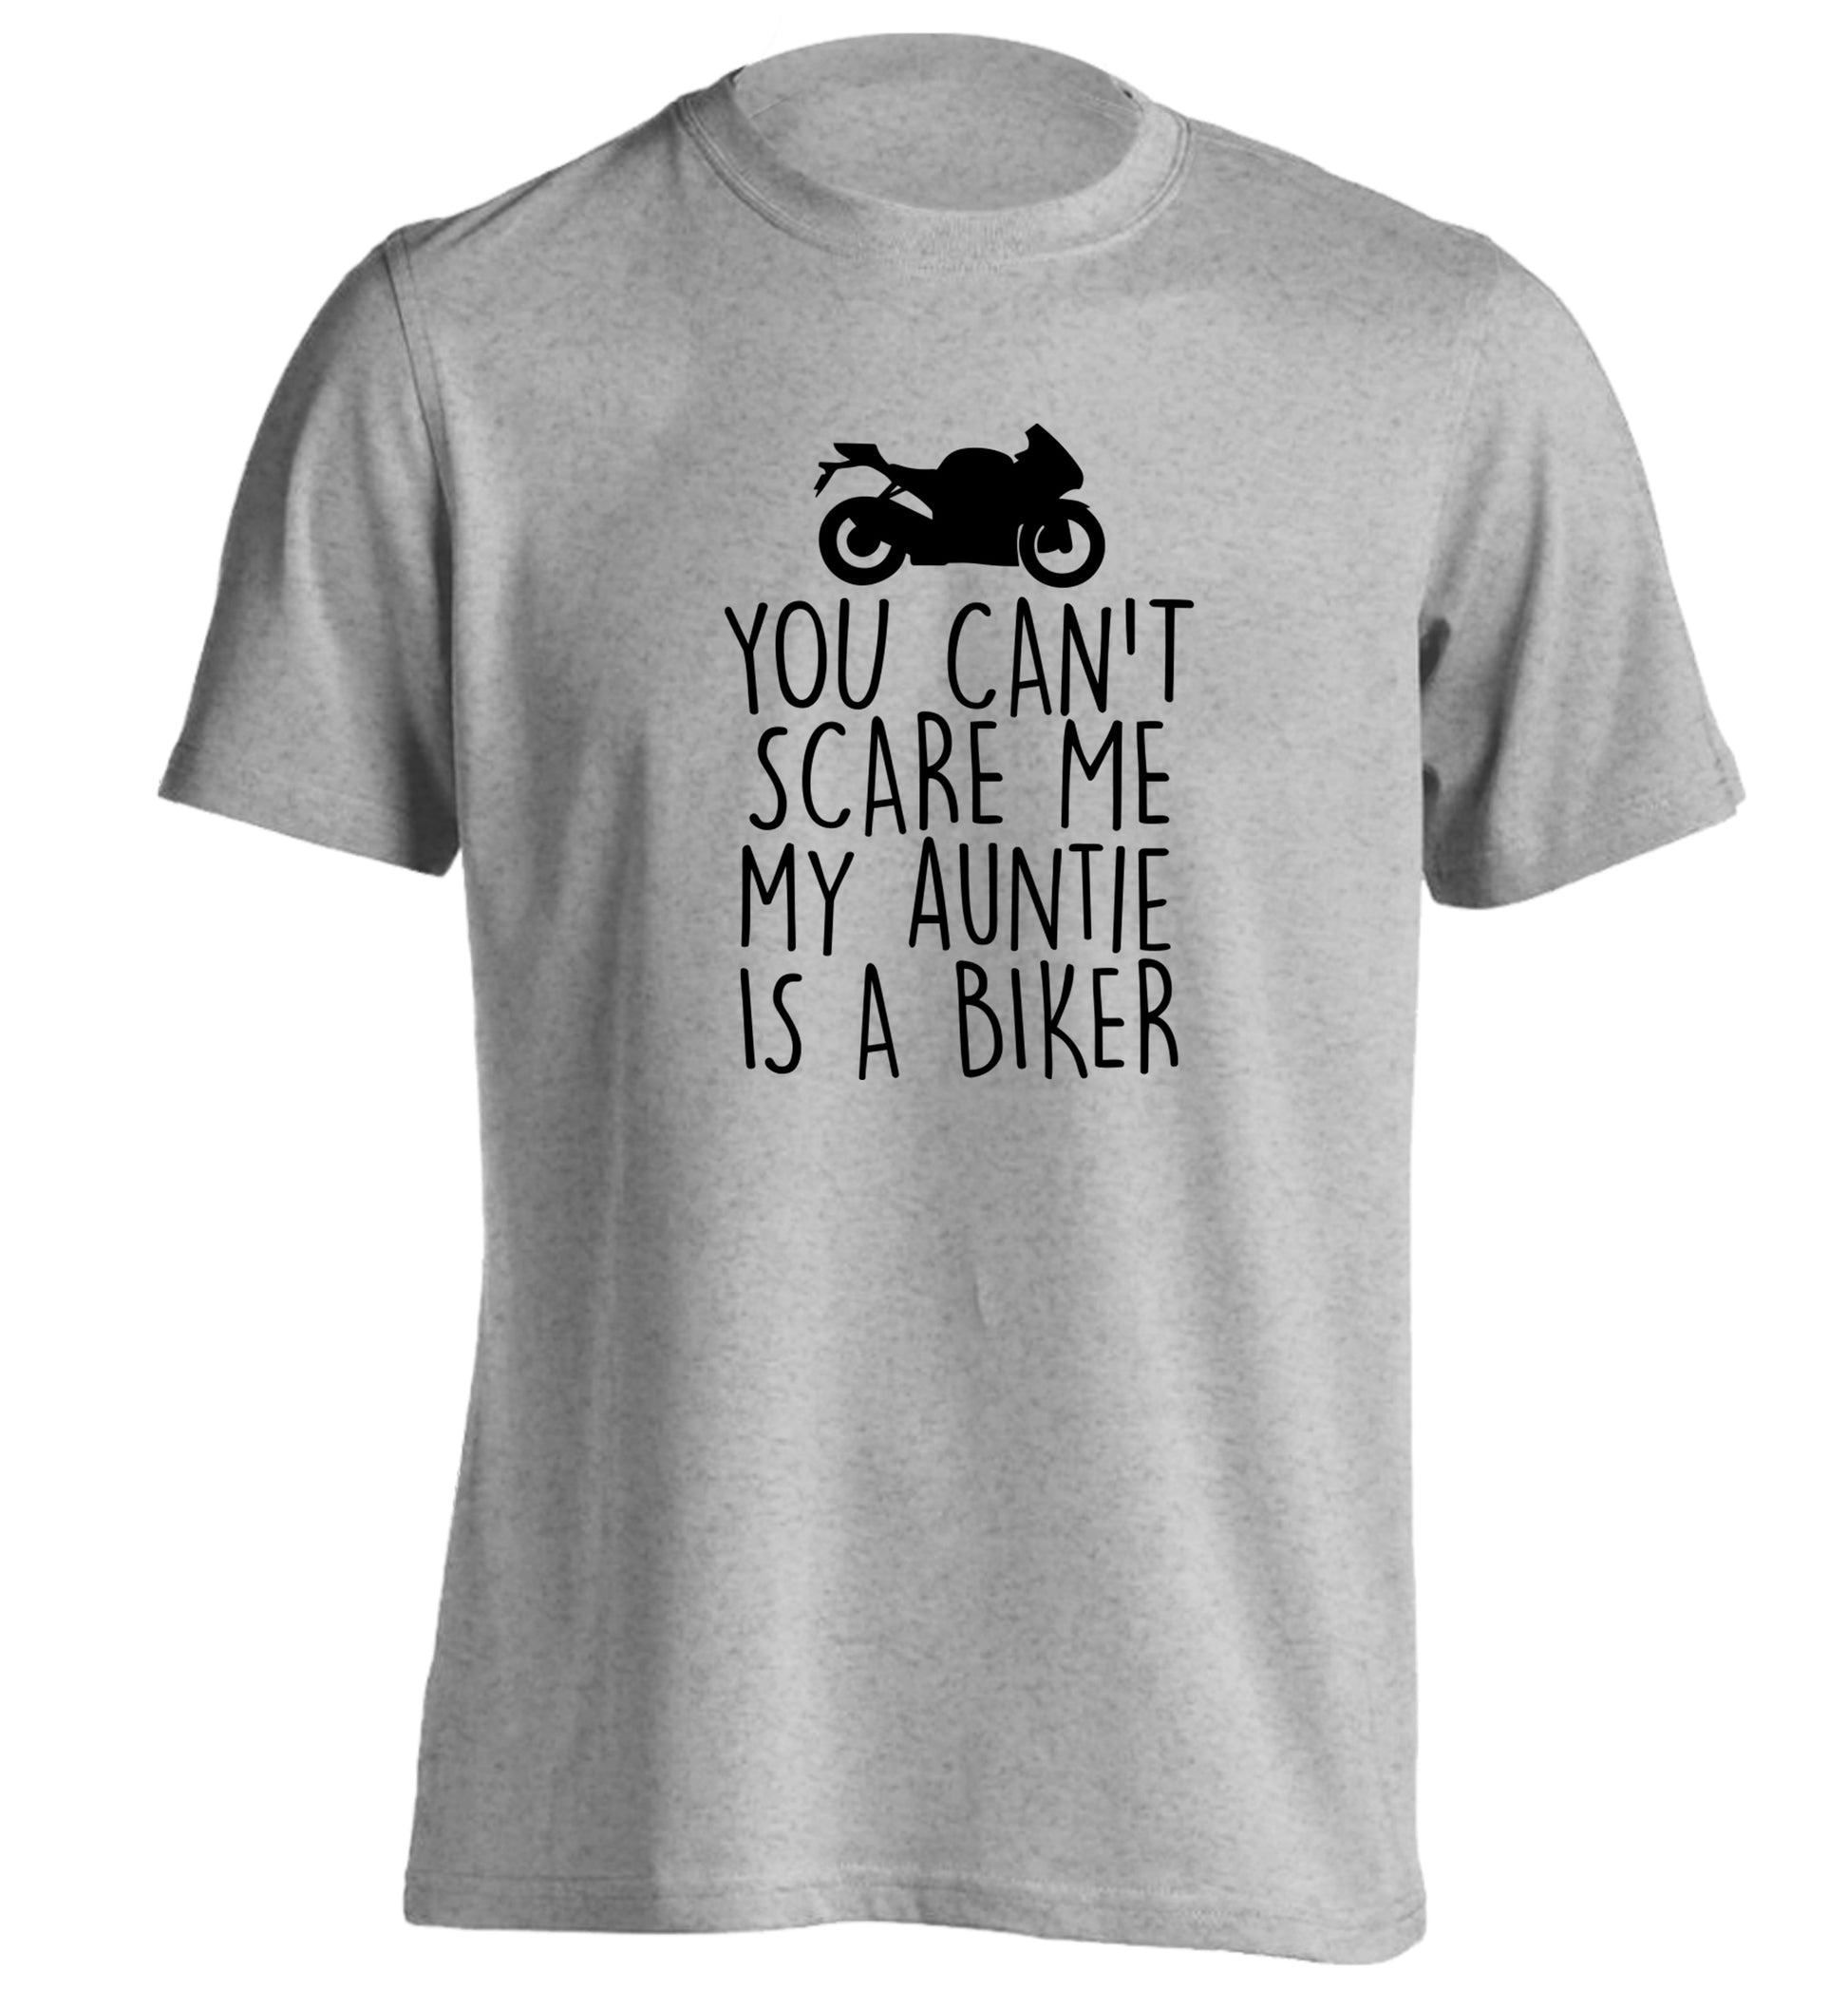 You can't scare me my auntie is a biker adults unisex grey Tshirt 2XL